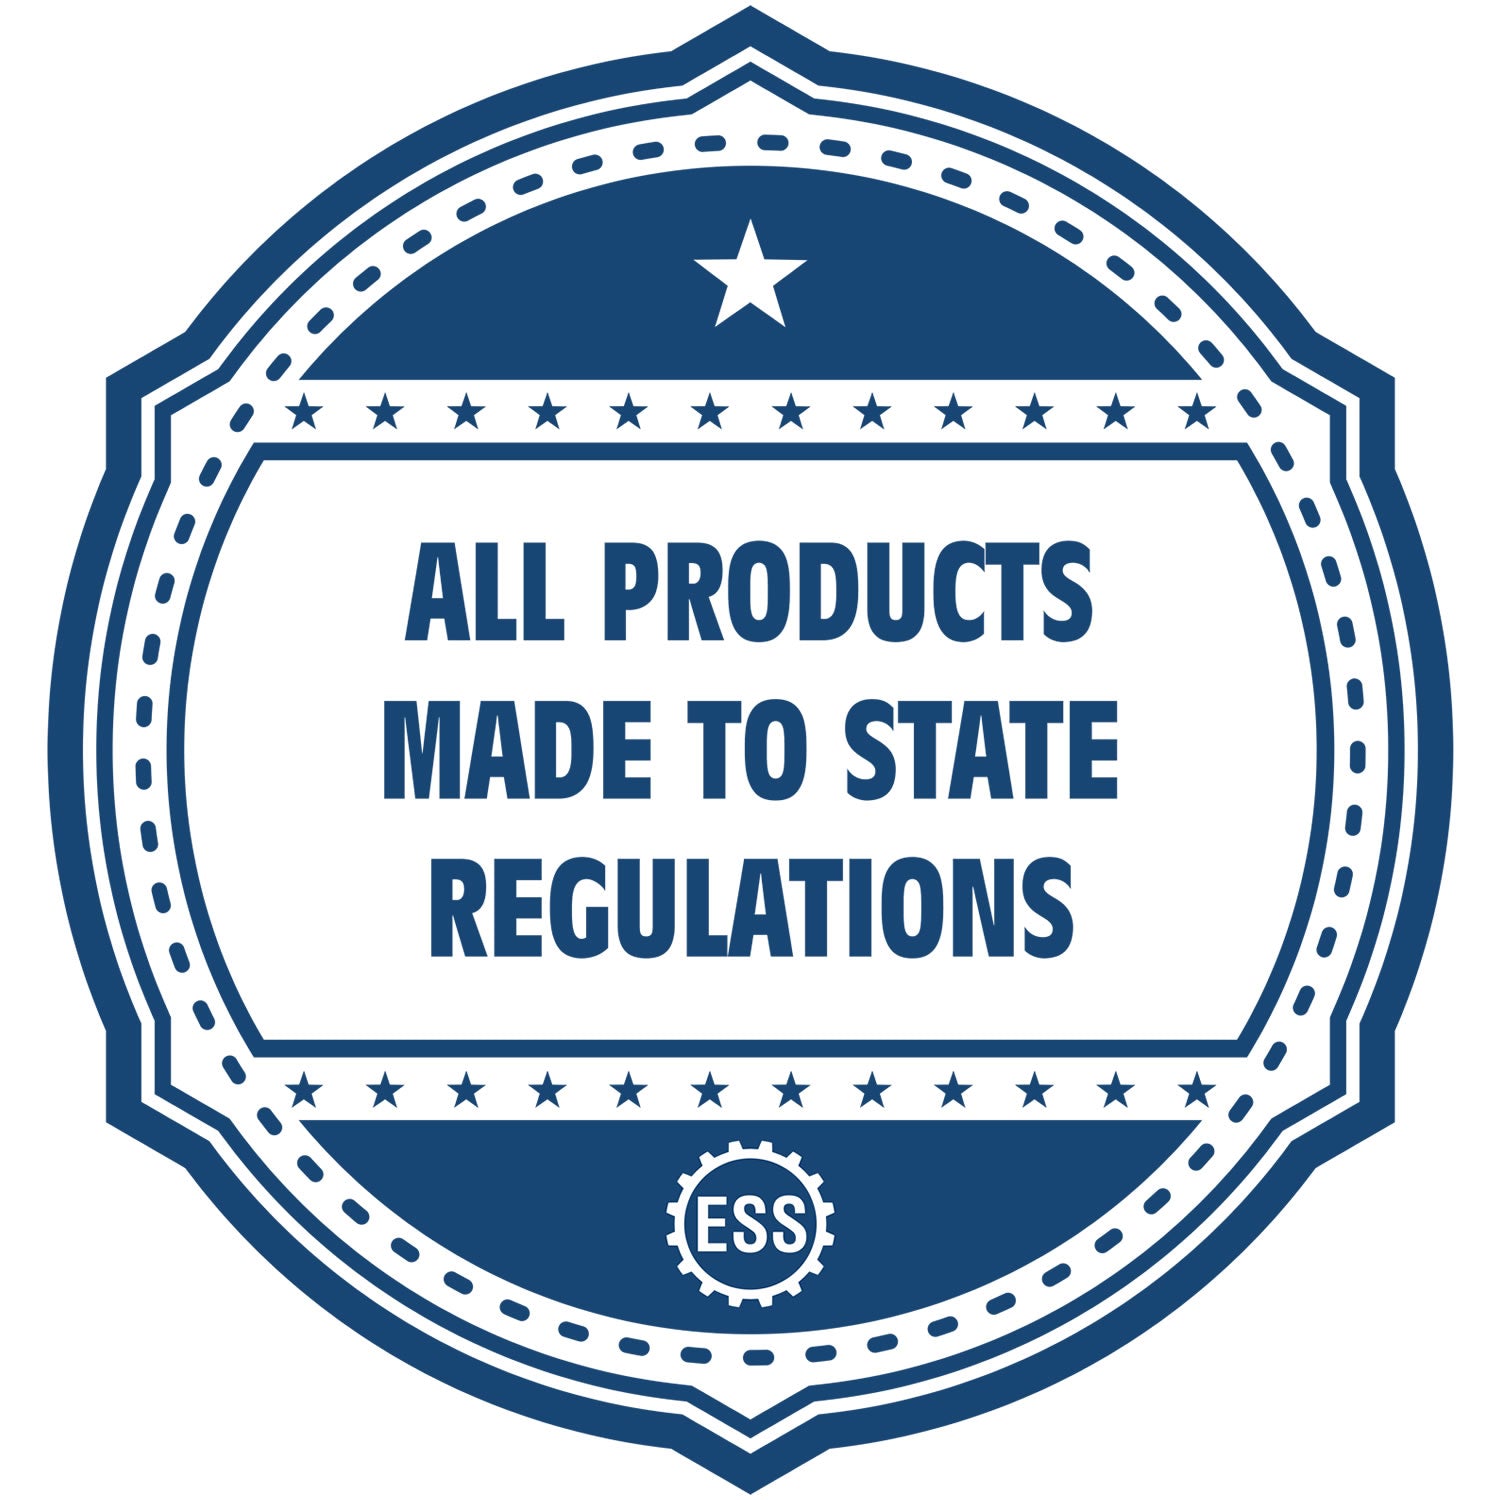 An icon or badge element for the Tennessee Long Reach Landscape Architect Embossing Stamp showing that this product is made in compliance with state regulations.